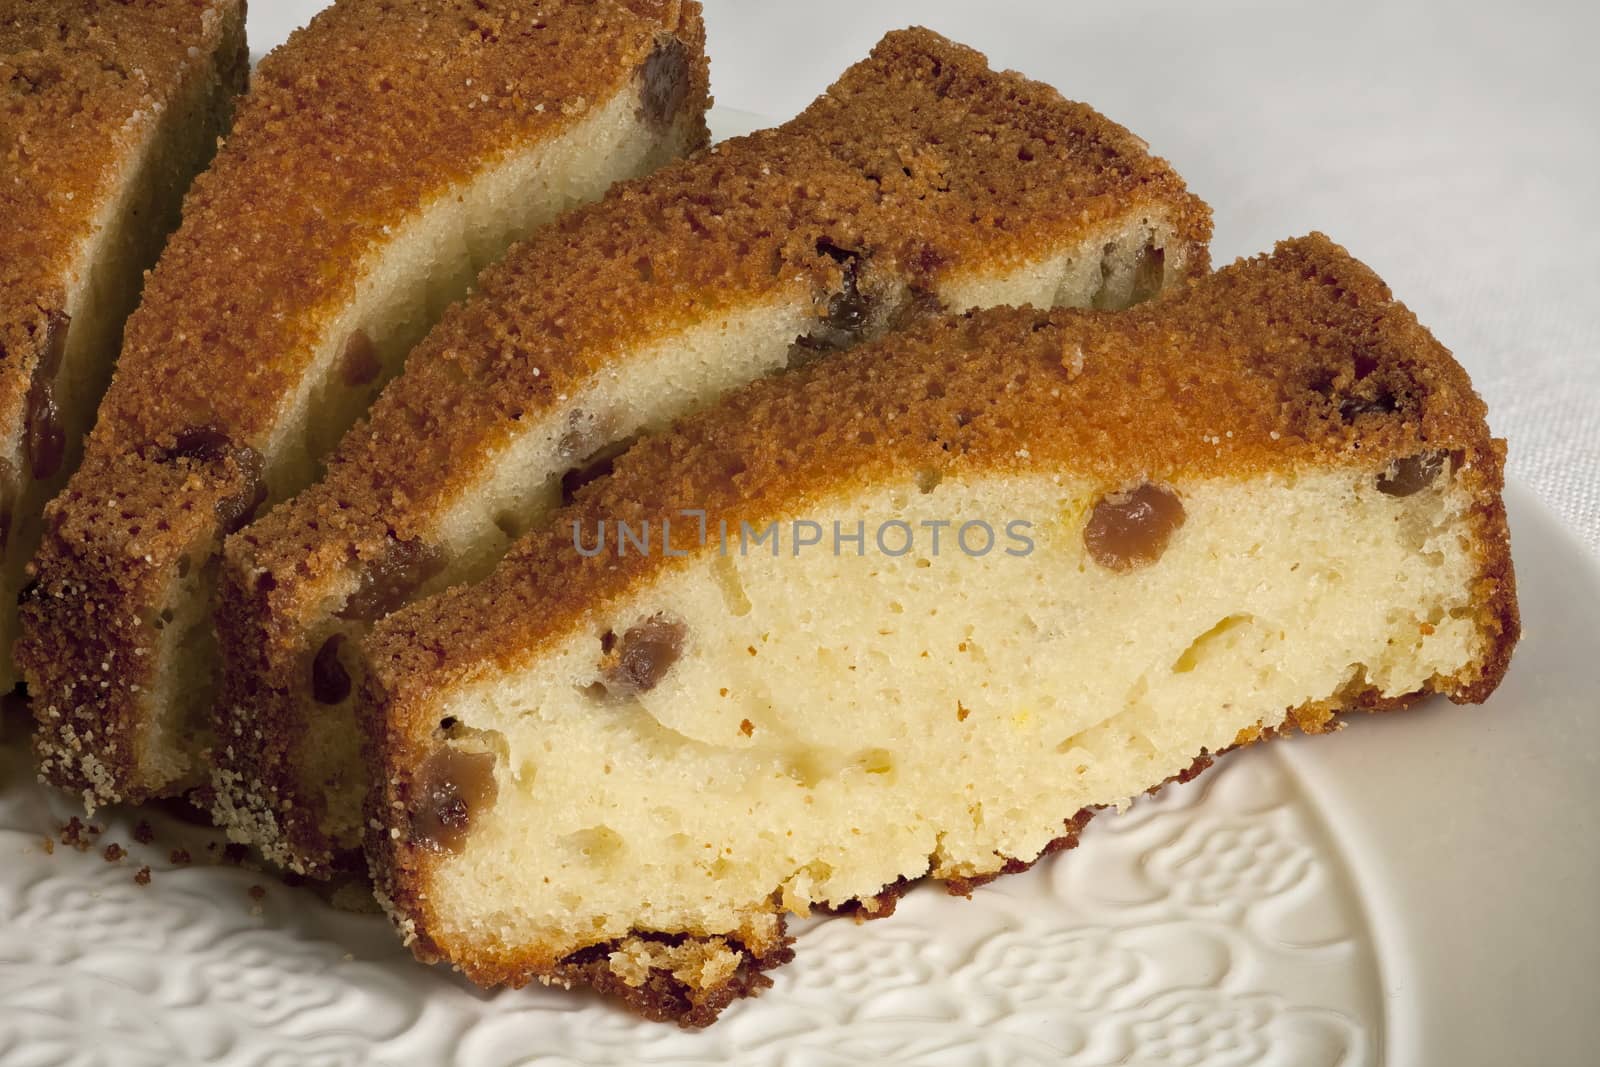 Curd cake with raisins and ruddy crust by mrivserg